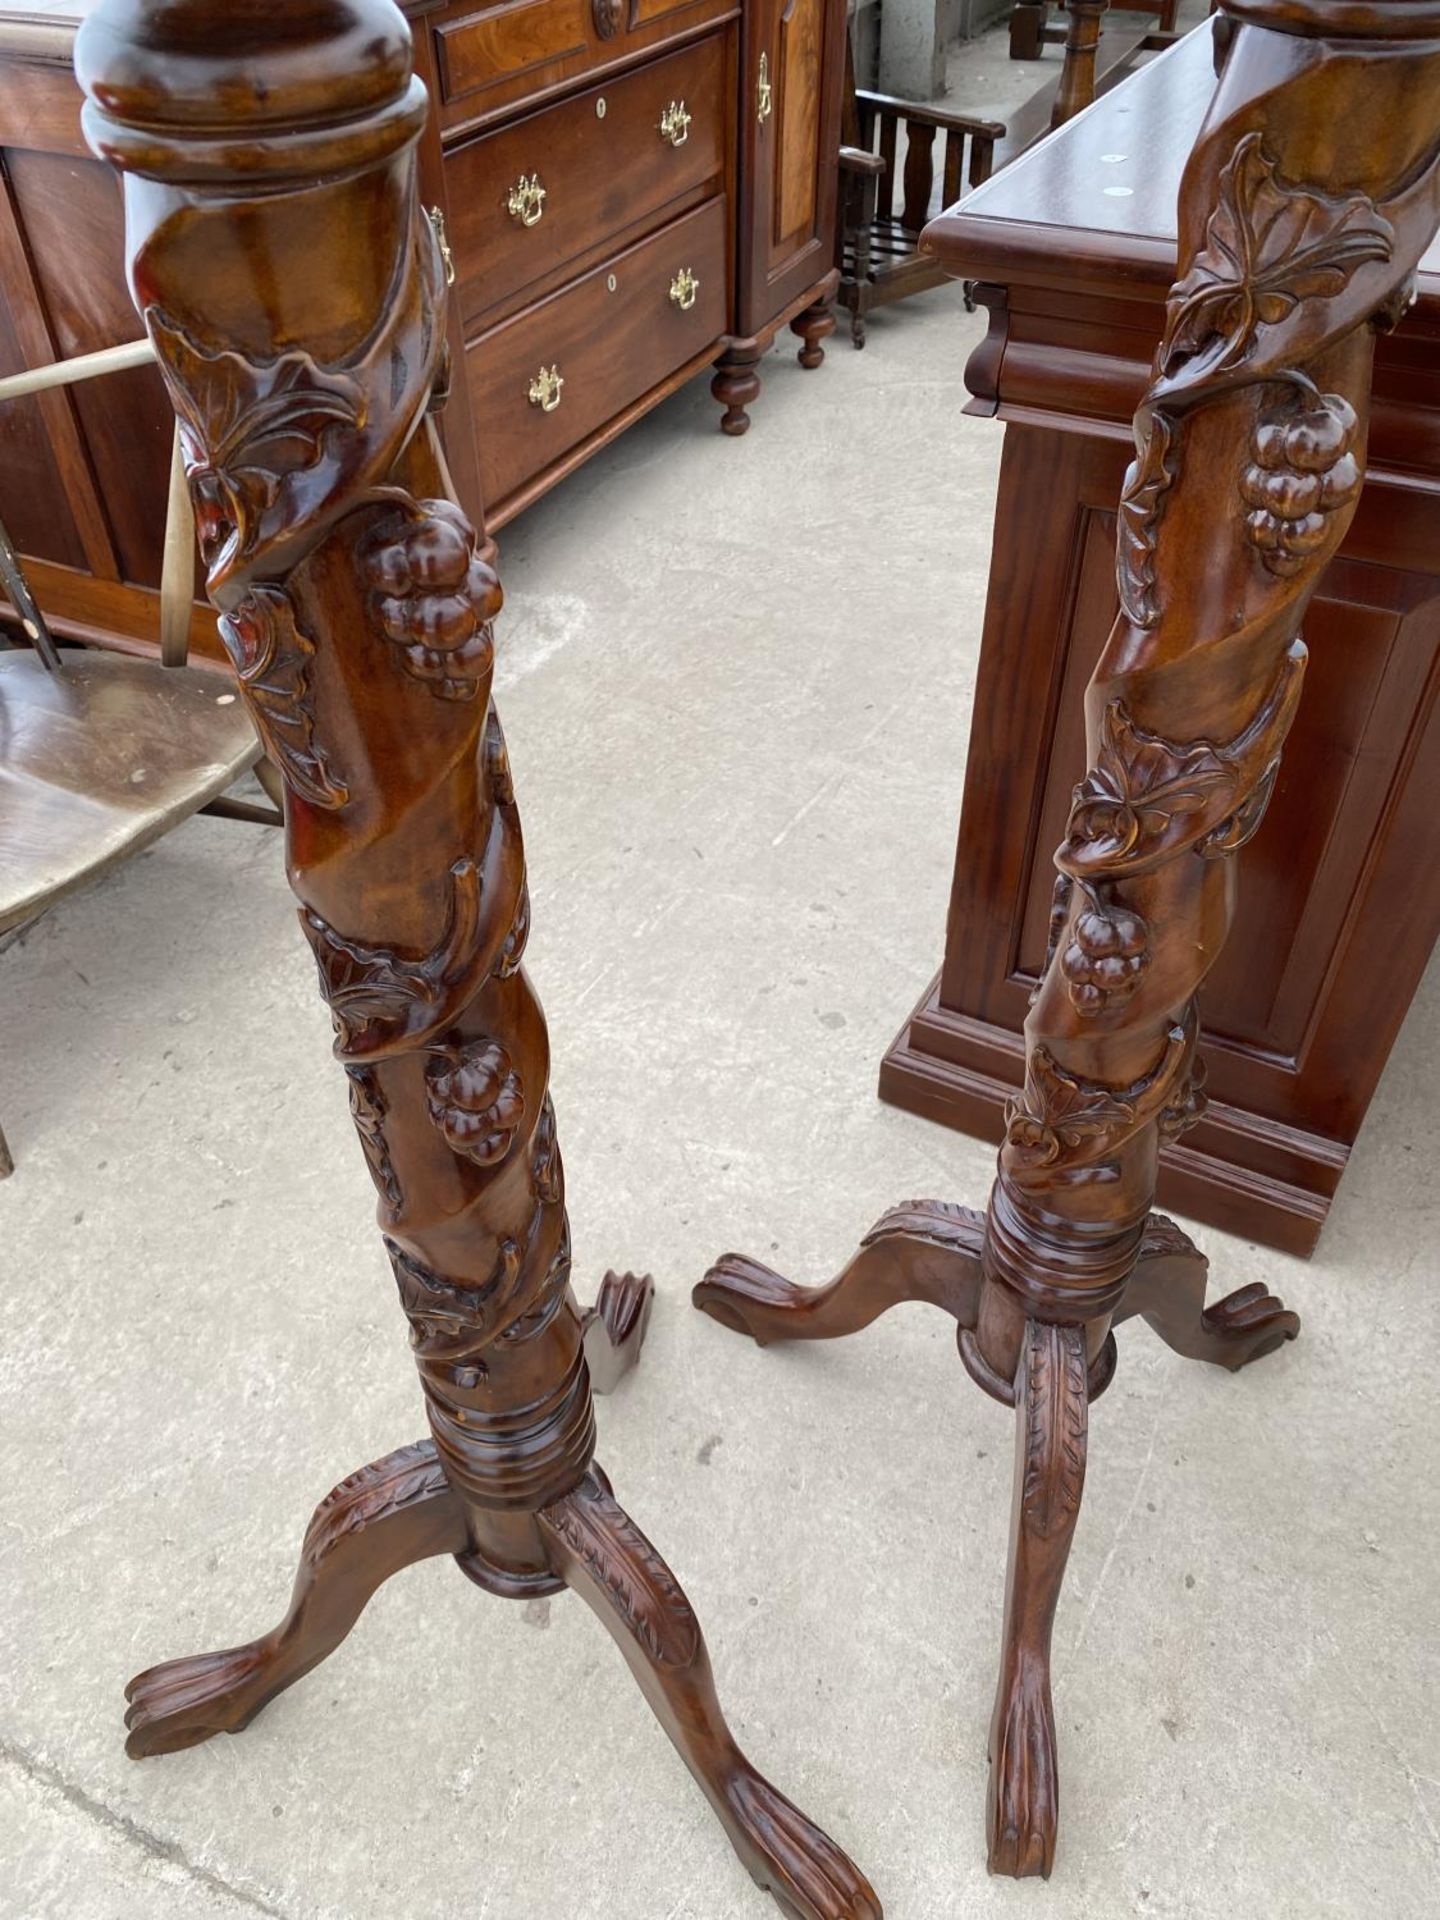 A PAIR OF VICTORIAN STYLE MAHOGANY TORCHERES ON TRIPOD BASES WITH FRUIT AND LEAF COLUMN DECORATION - Image 3 of 6